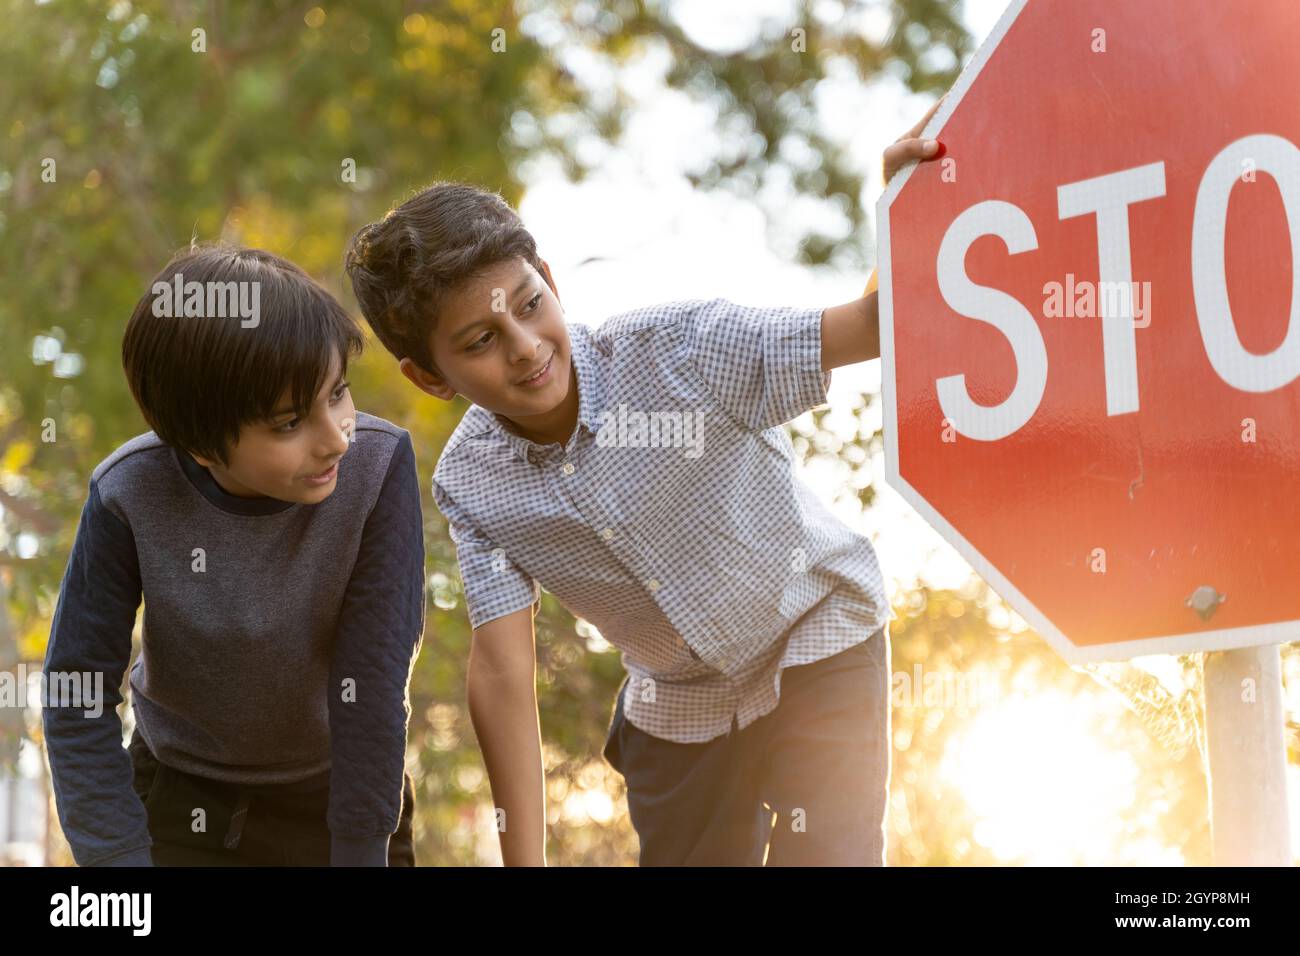 Friendship concept with diverse kids. Two kids laughing next to stop street sign. Overcoming barriers concept, childhood memories. Stock Photo